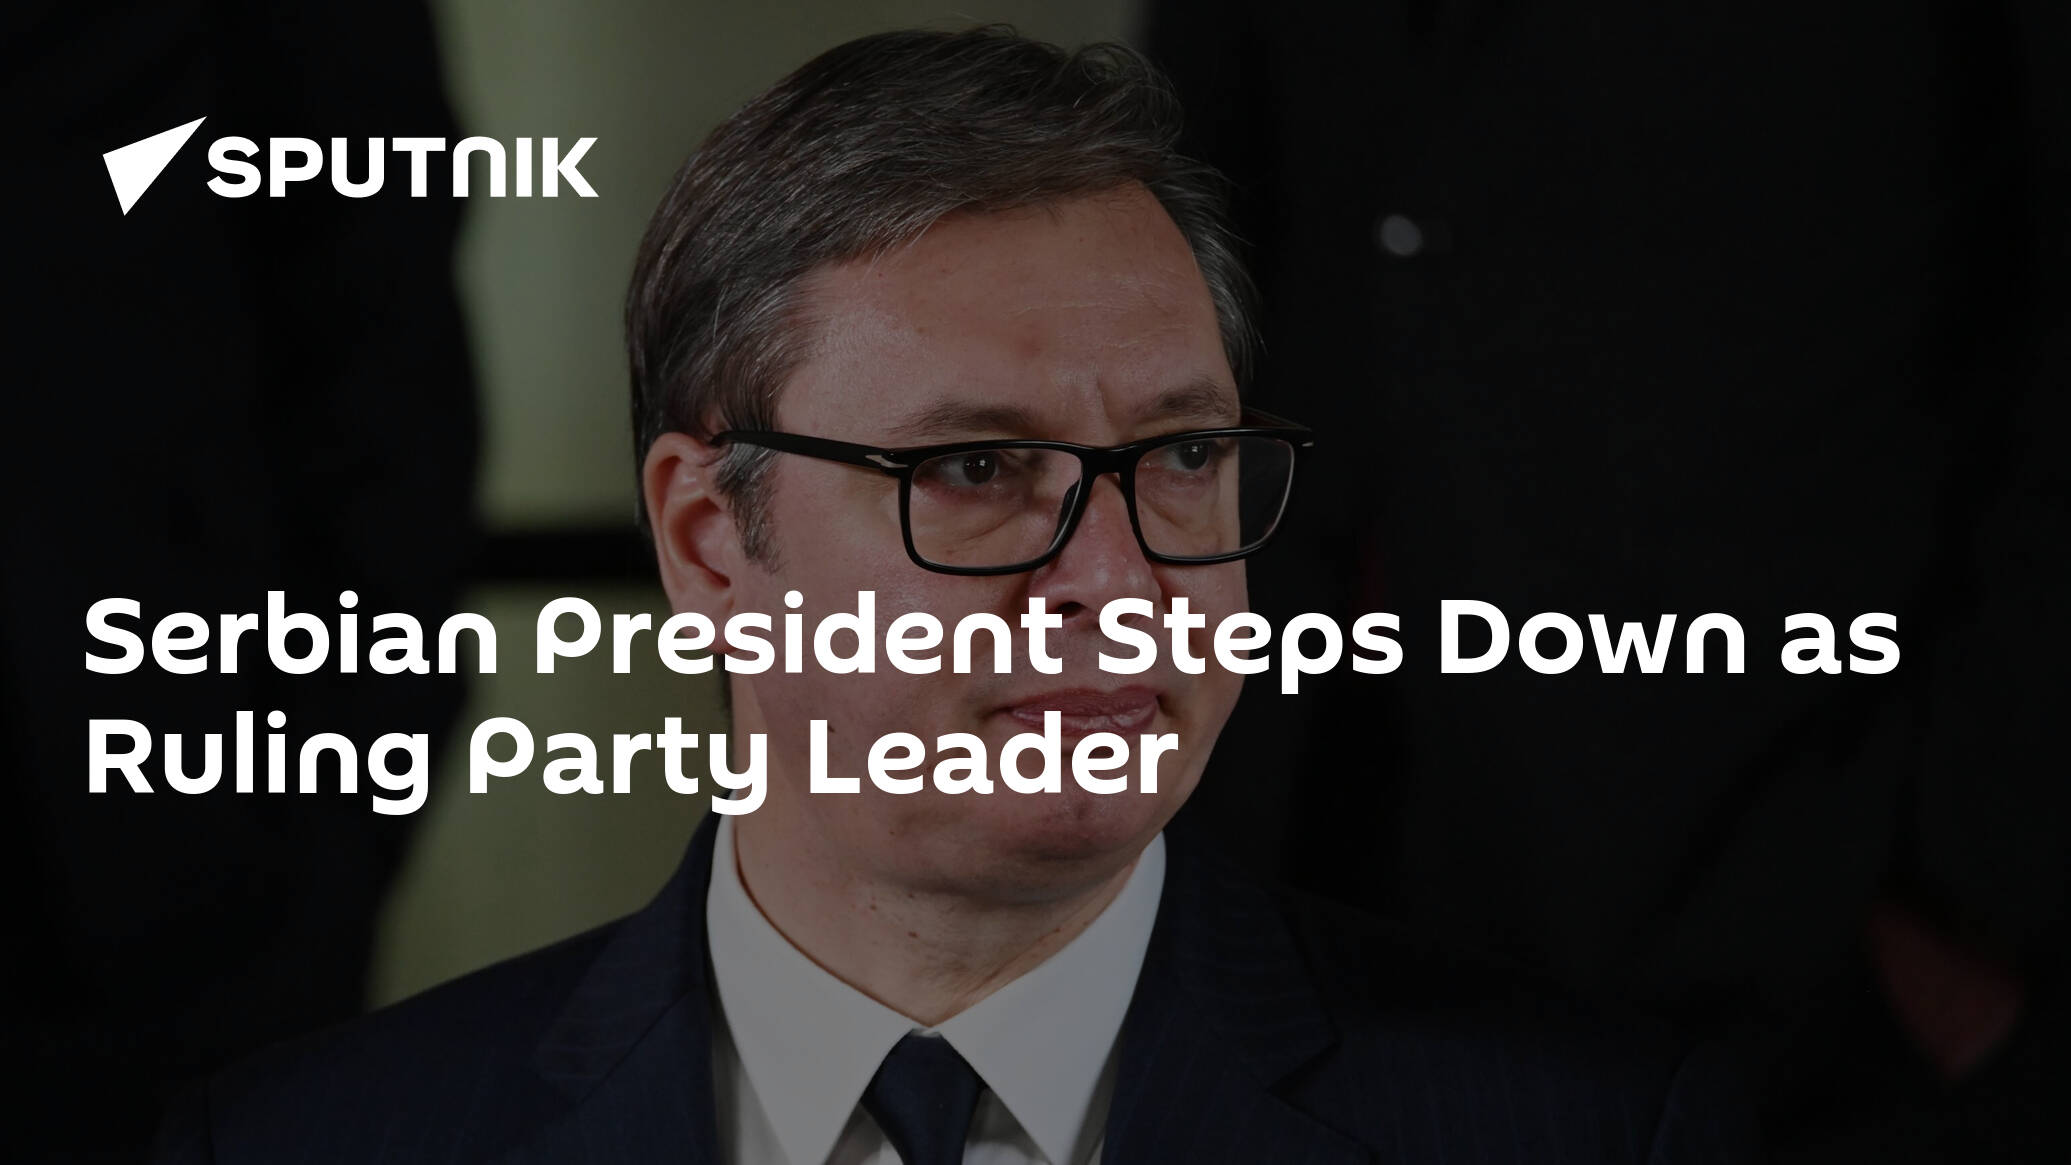 Serbian President Steps Down as Ruling Party Leader